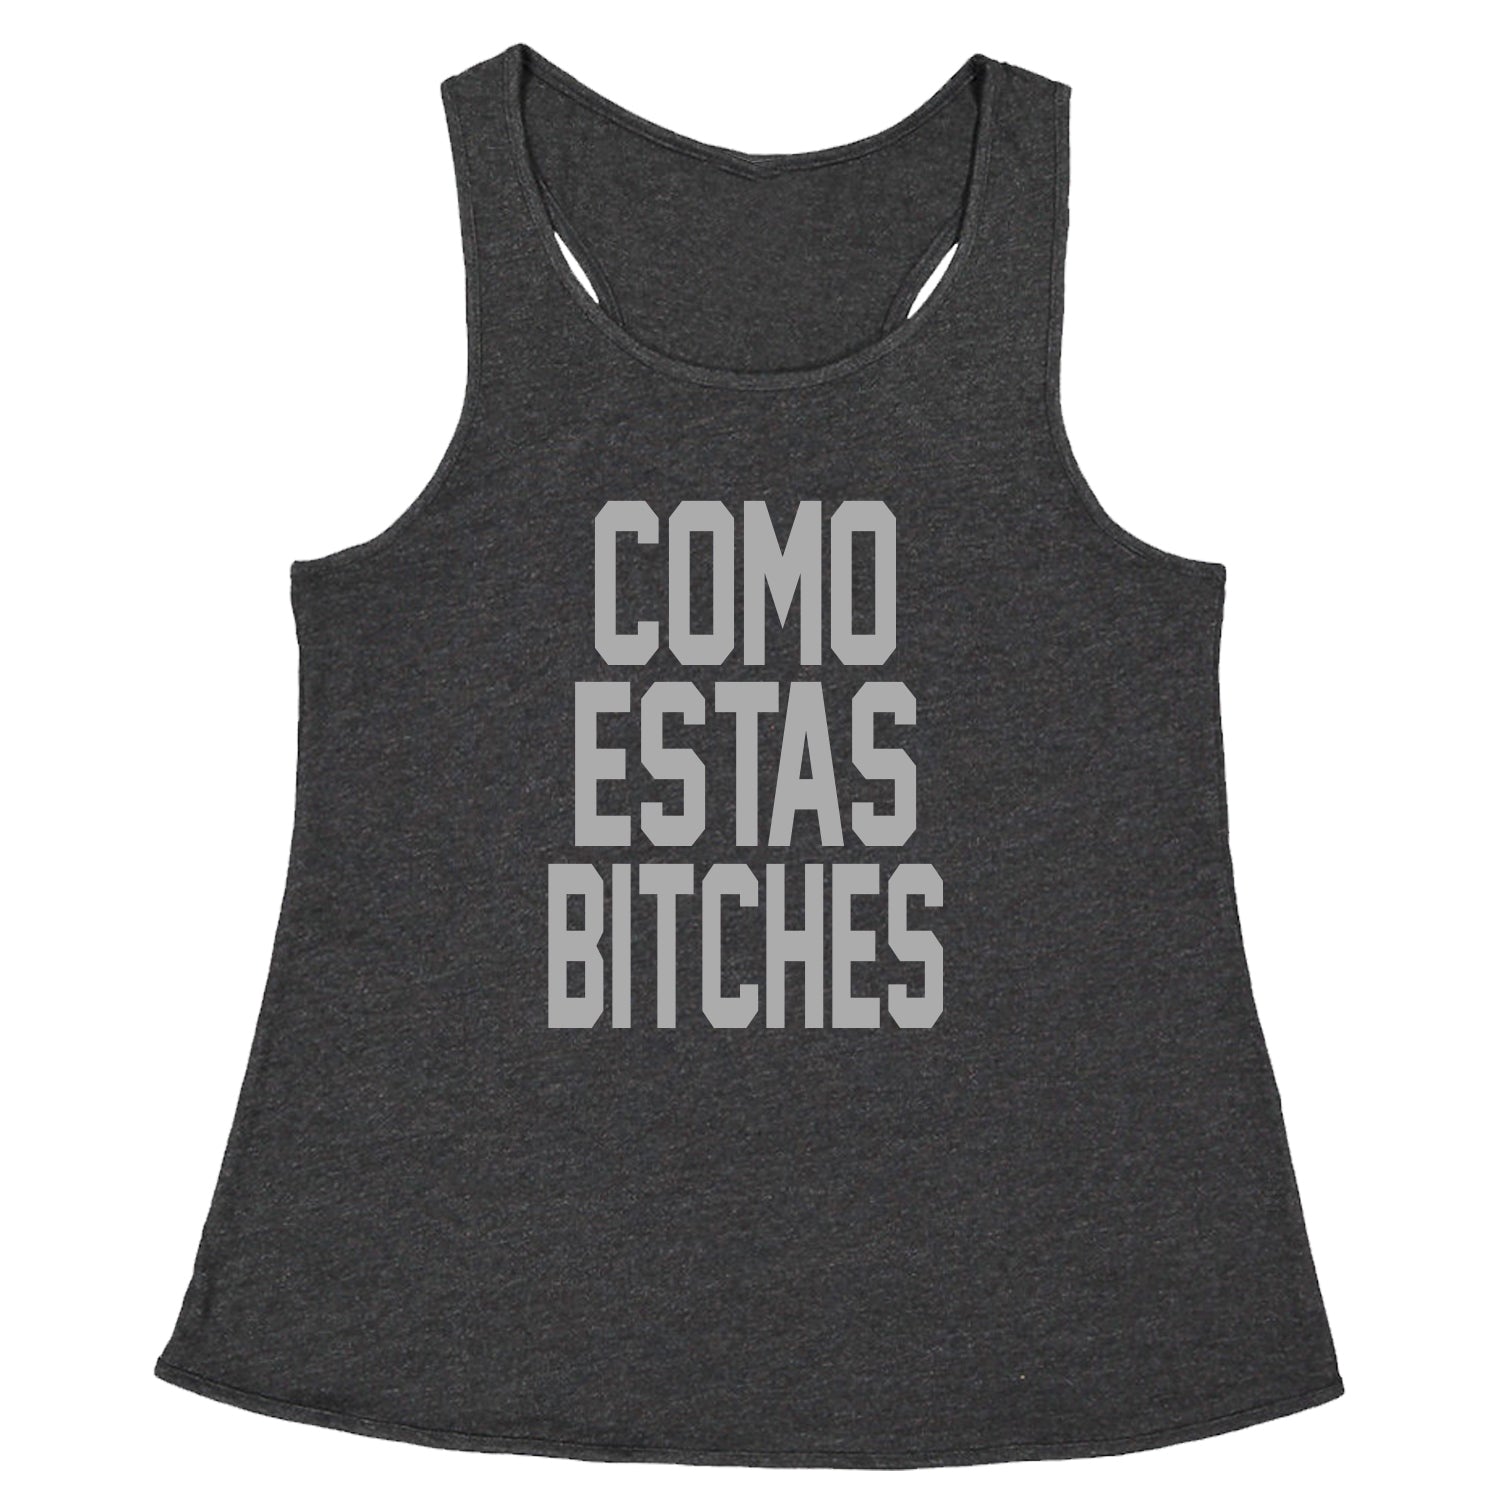 Como Estas B-tches Racerback Tank Top for Women #expressiontees by Expression Tees